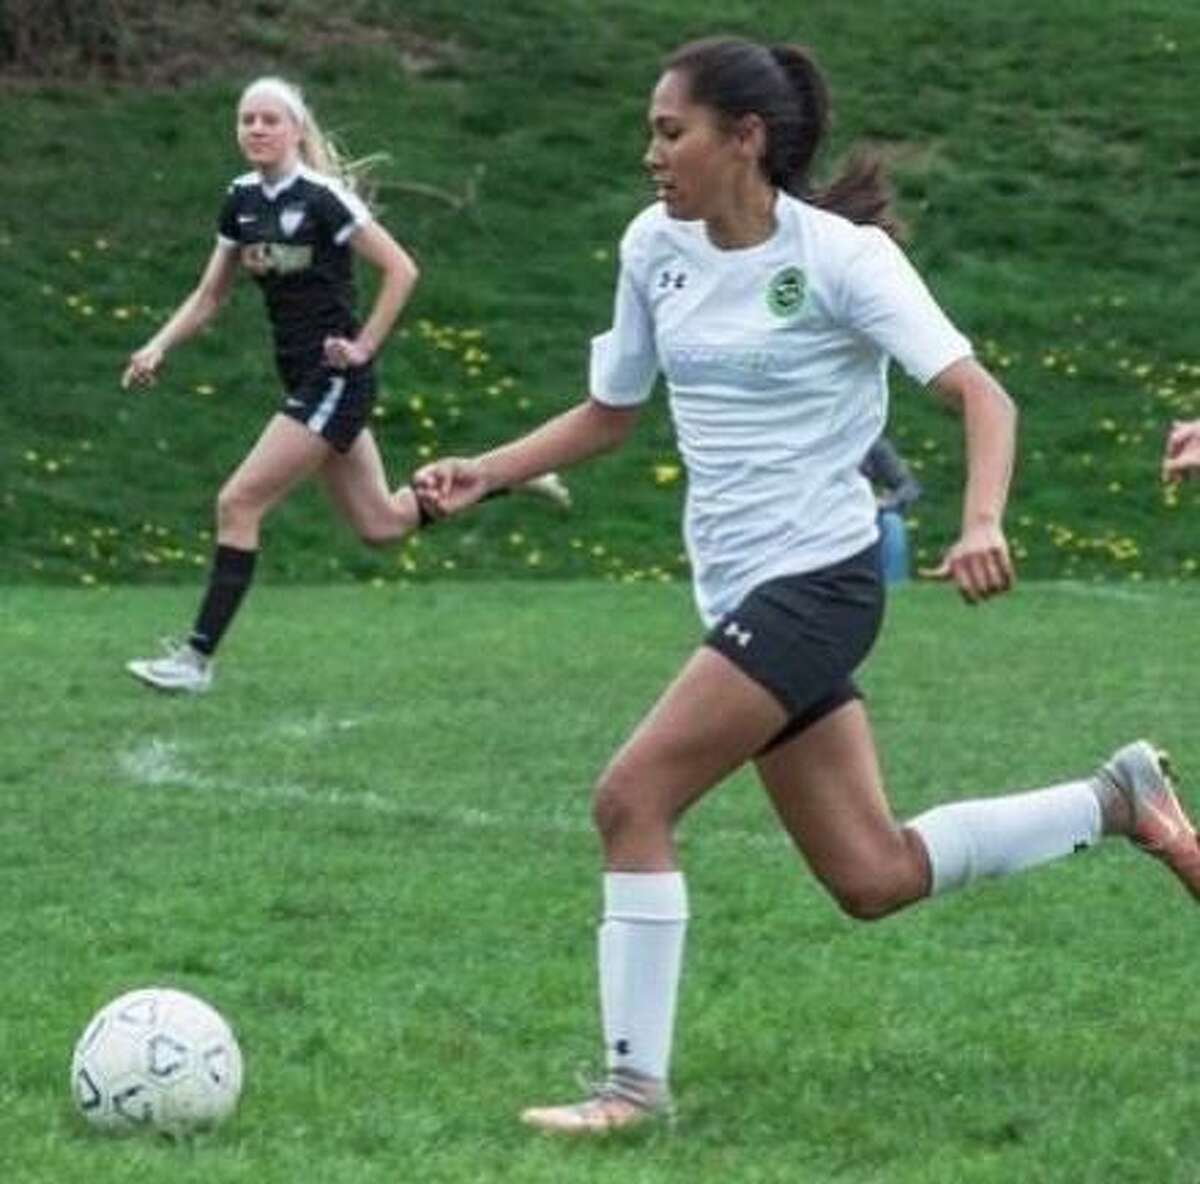 Norwalk soccer player Stephany Escalante, winner of the Fairfield County Sports Commission’s 2019 Chelsea Cohen Memorial Scholarship.